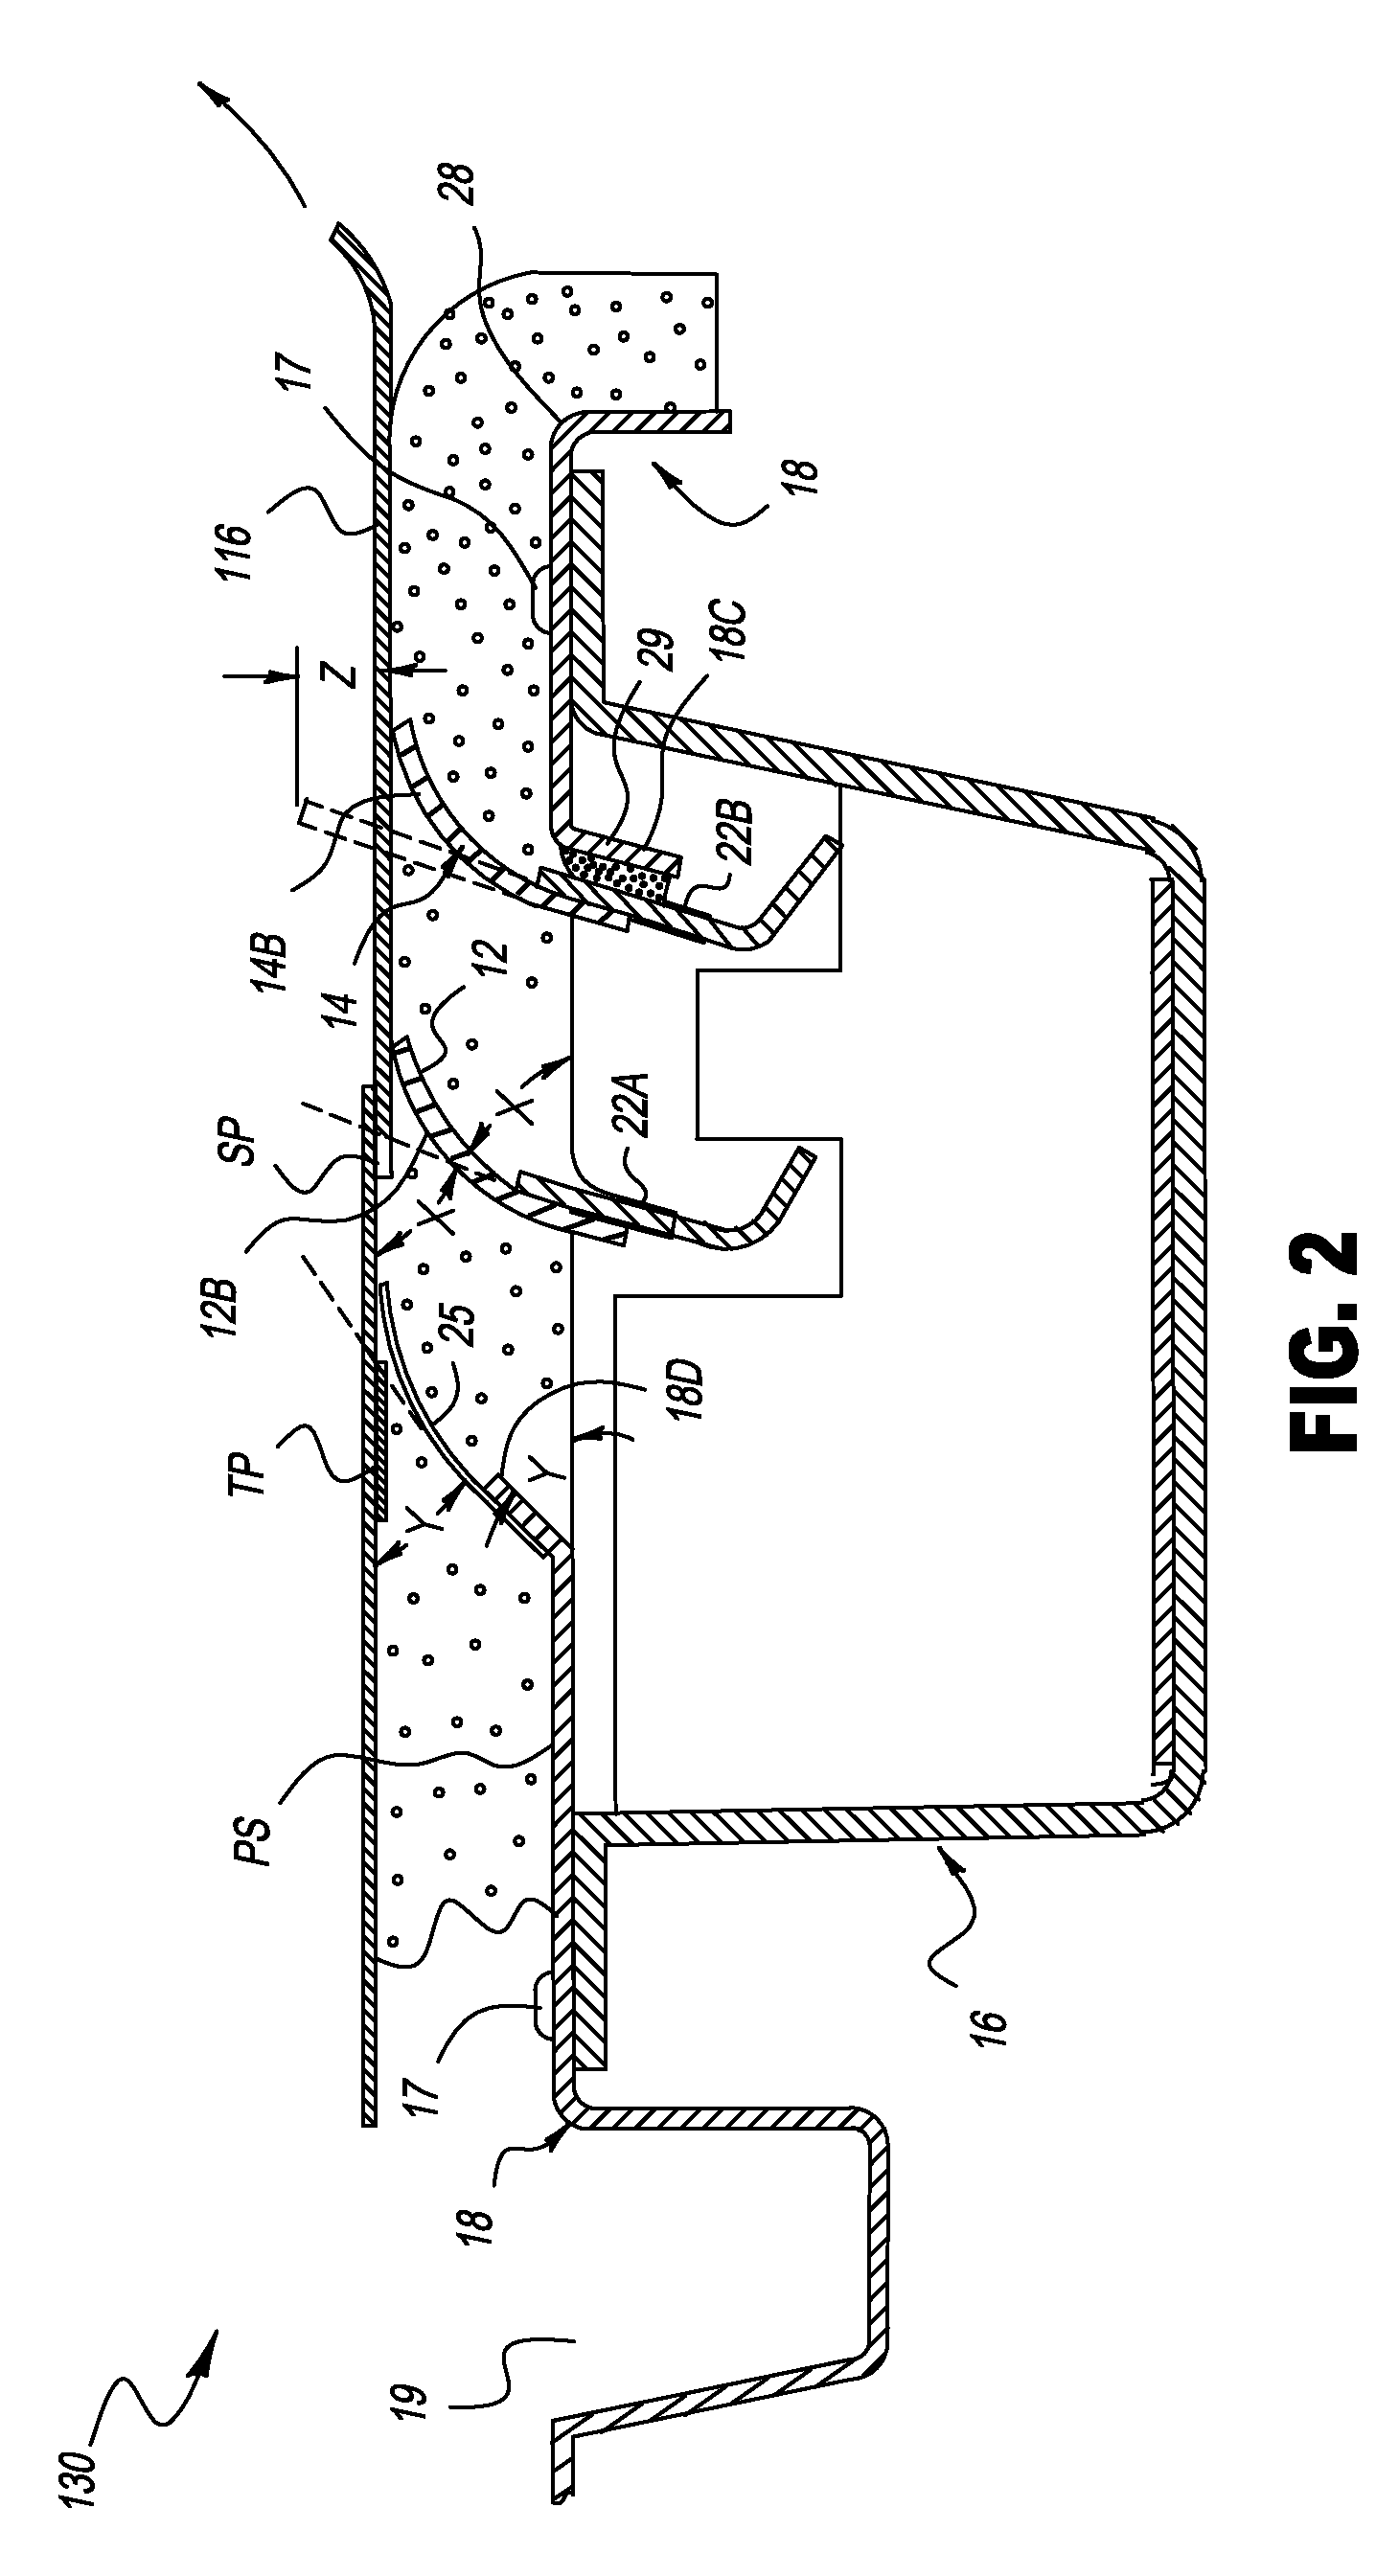 Electrostatographic cleaning blade member and apparatus